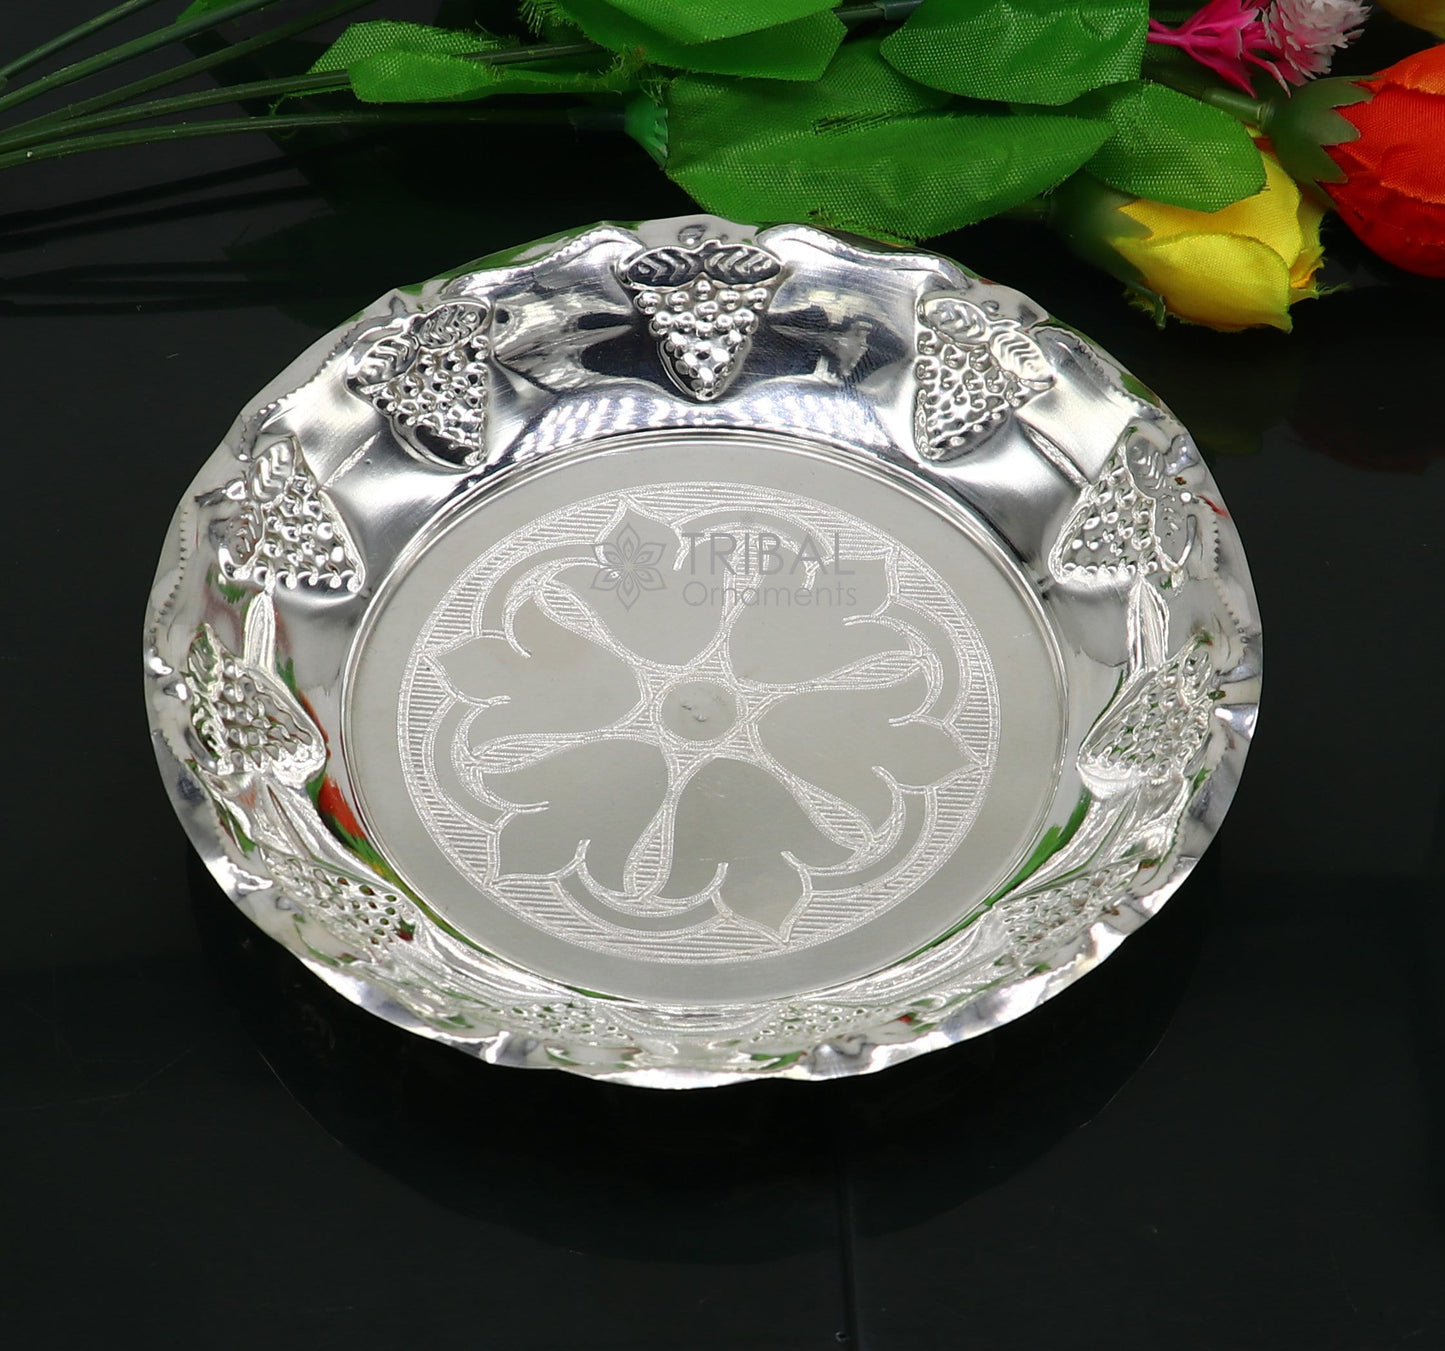 925 sterling silver exclusive handcrafted work light weight Puja tray or plate, silver puja utensils, silver article, silver thali  sv270 - TRIBAL ORNAMENTS